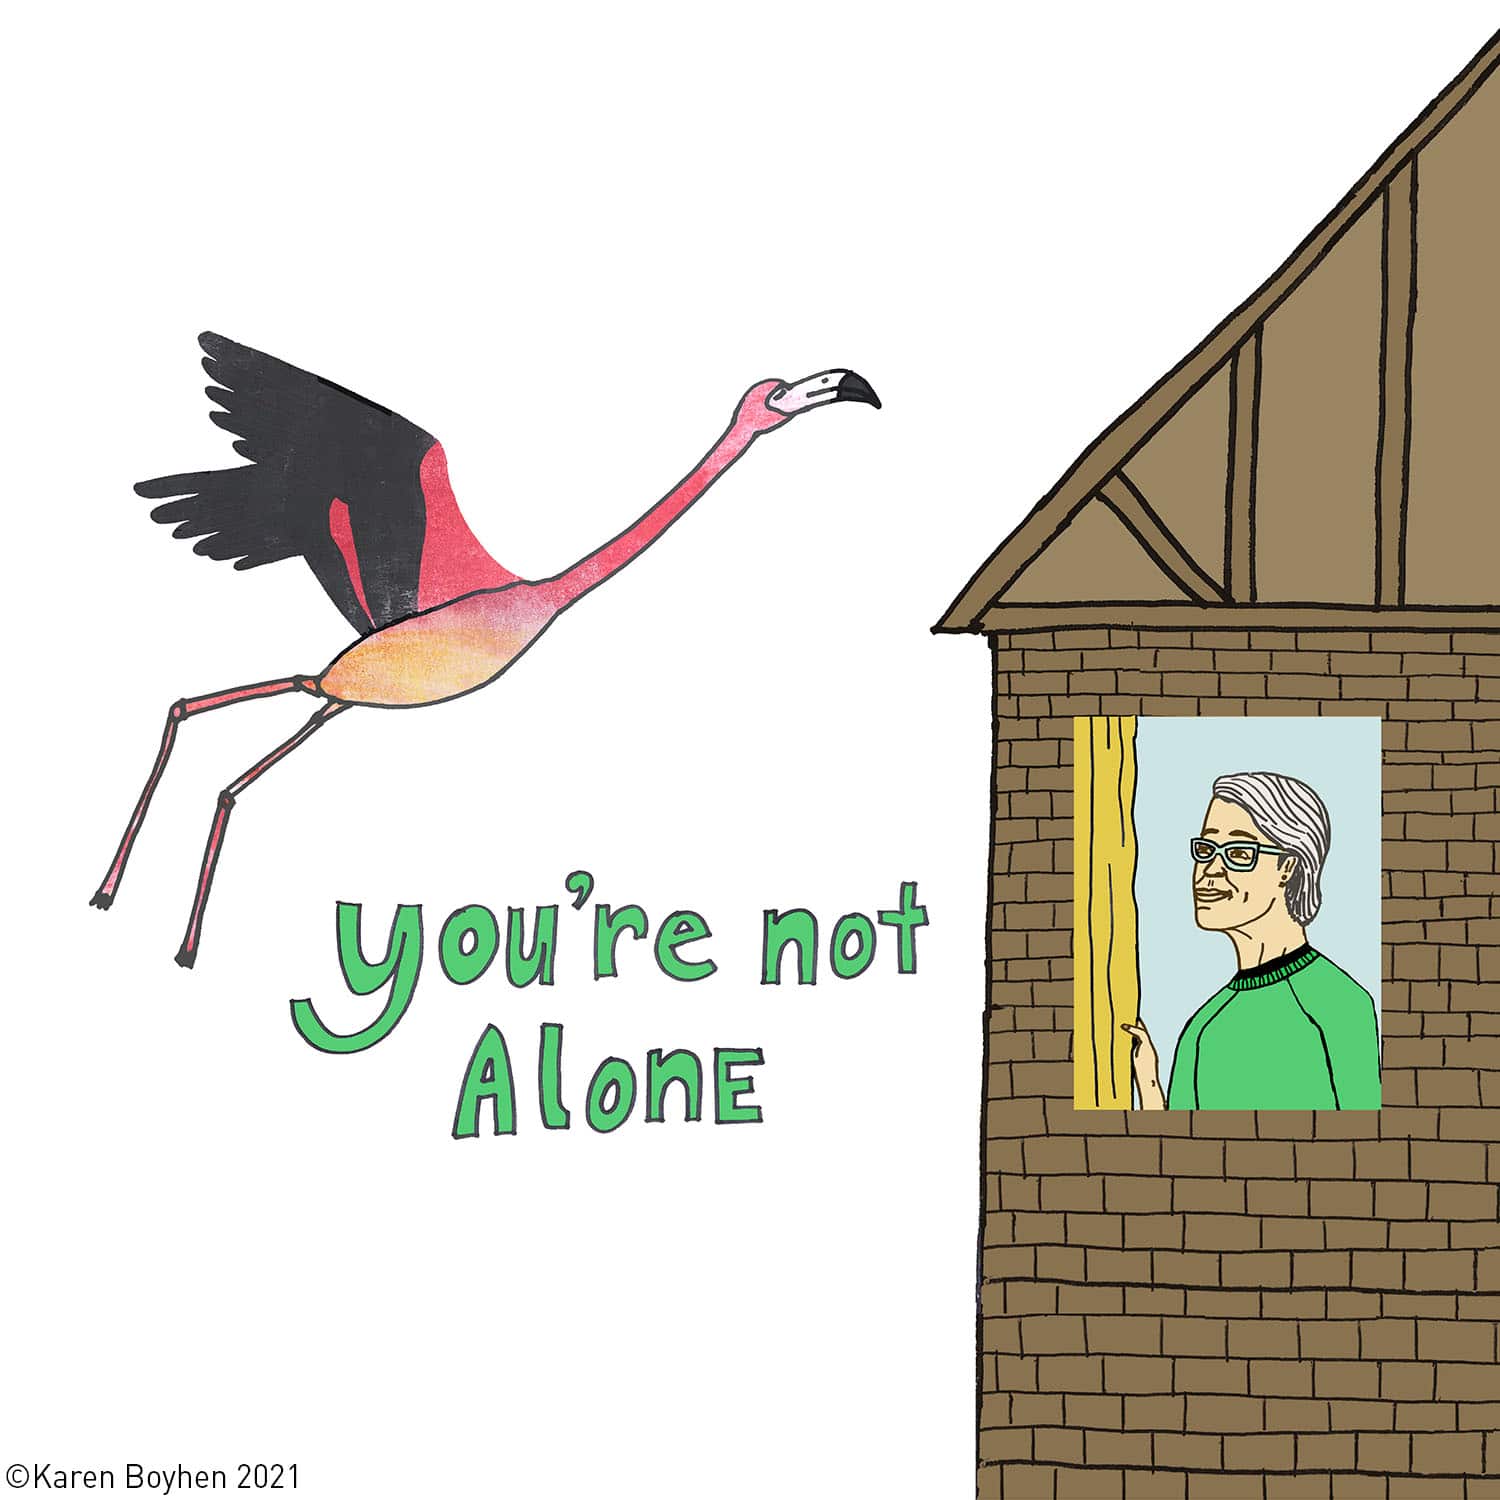 A flamingo flies outside a window with a person looking through a window. Text reads "You're not alone"